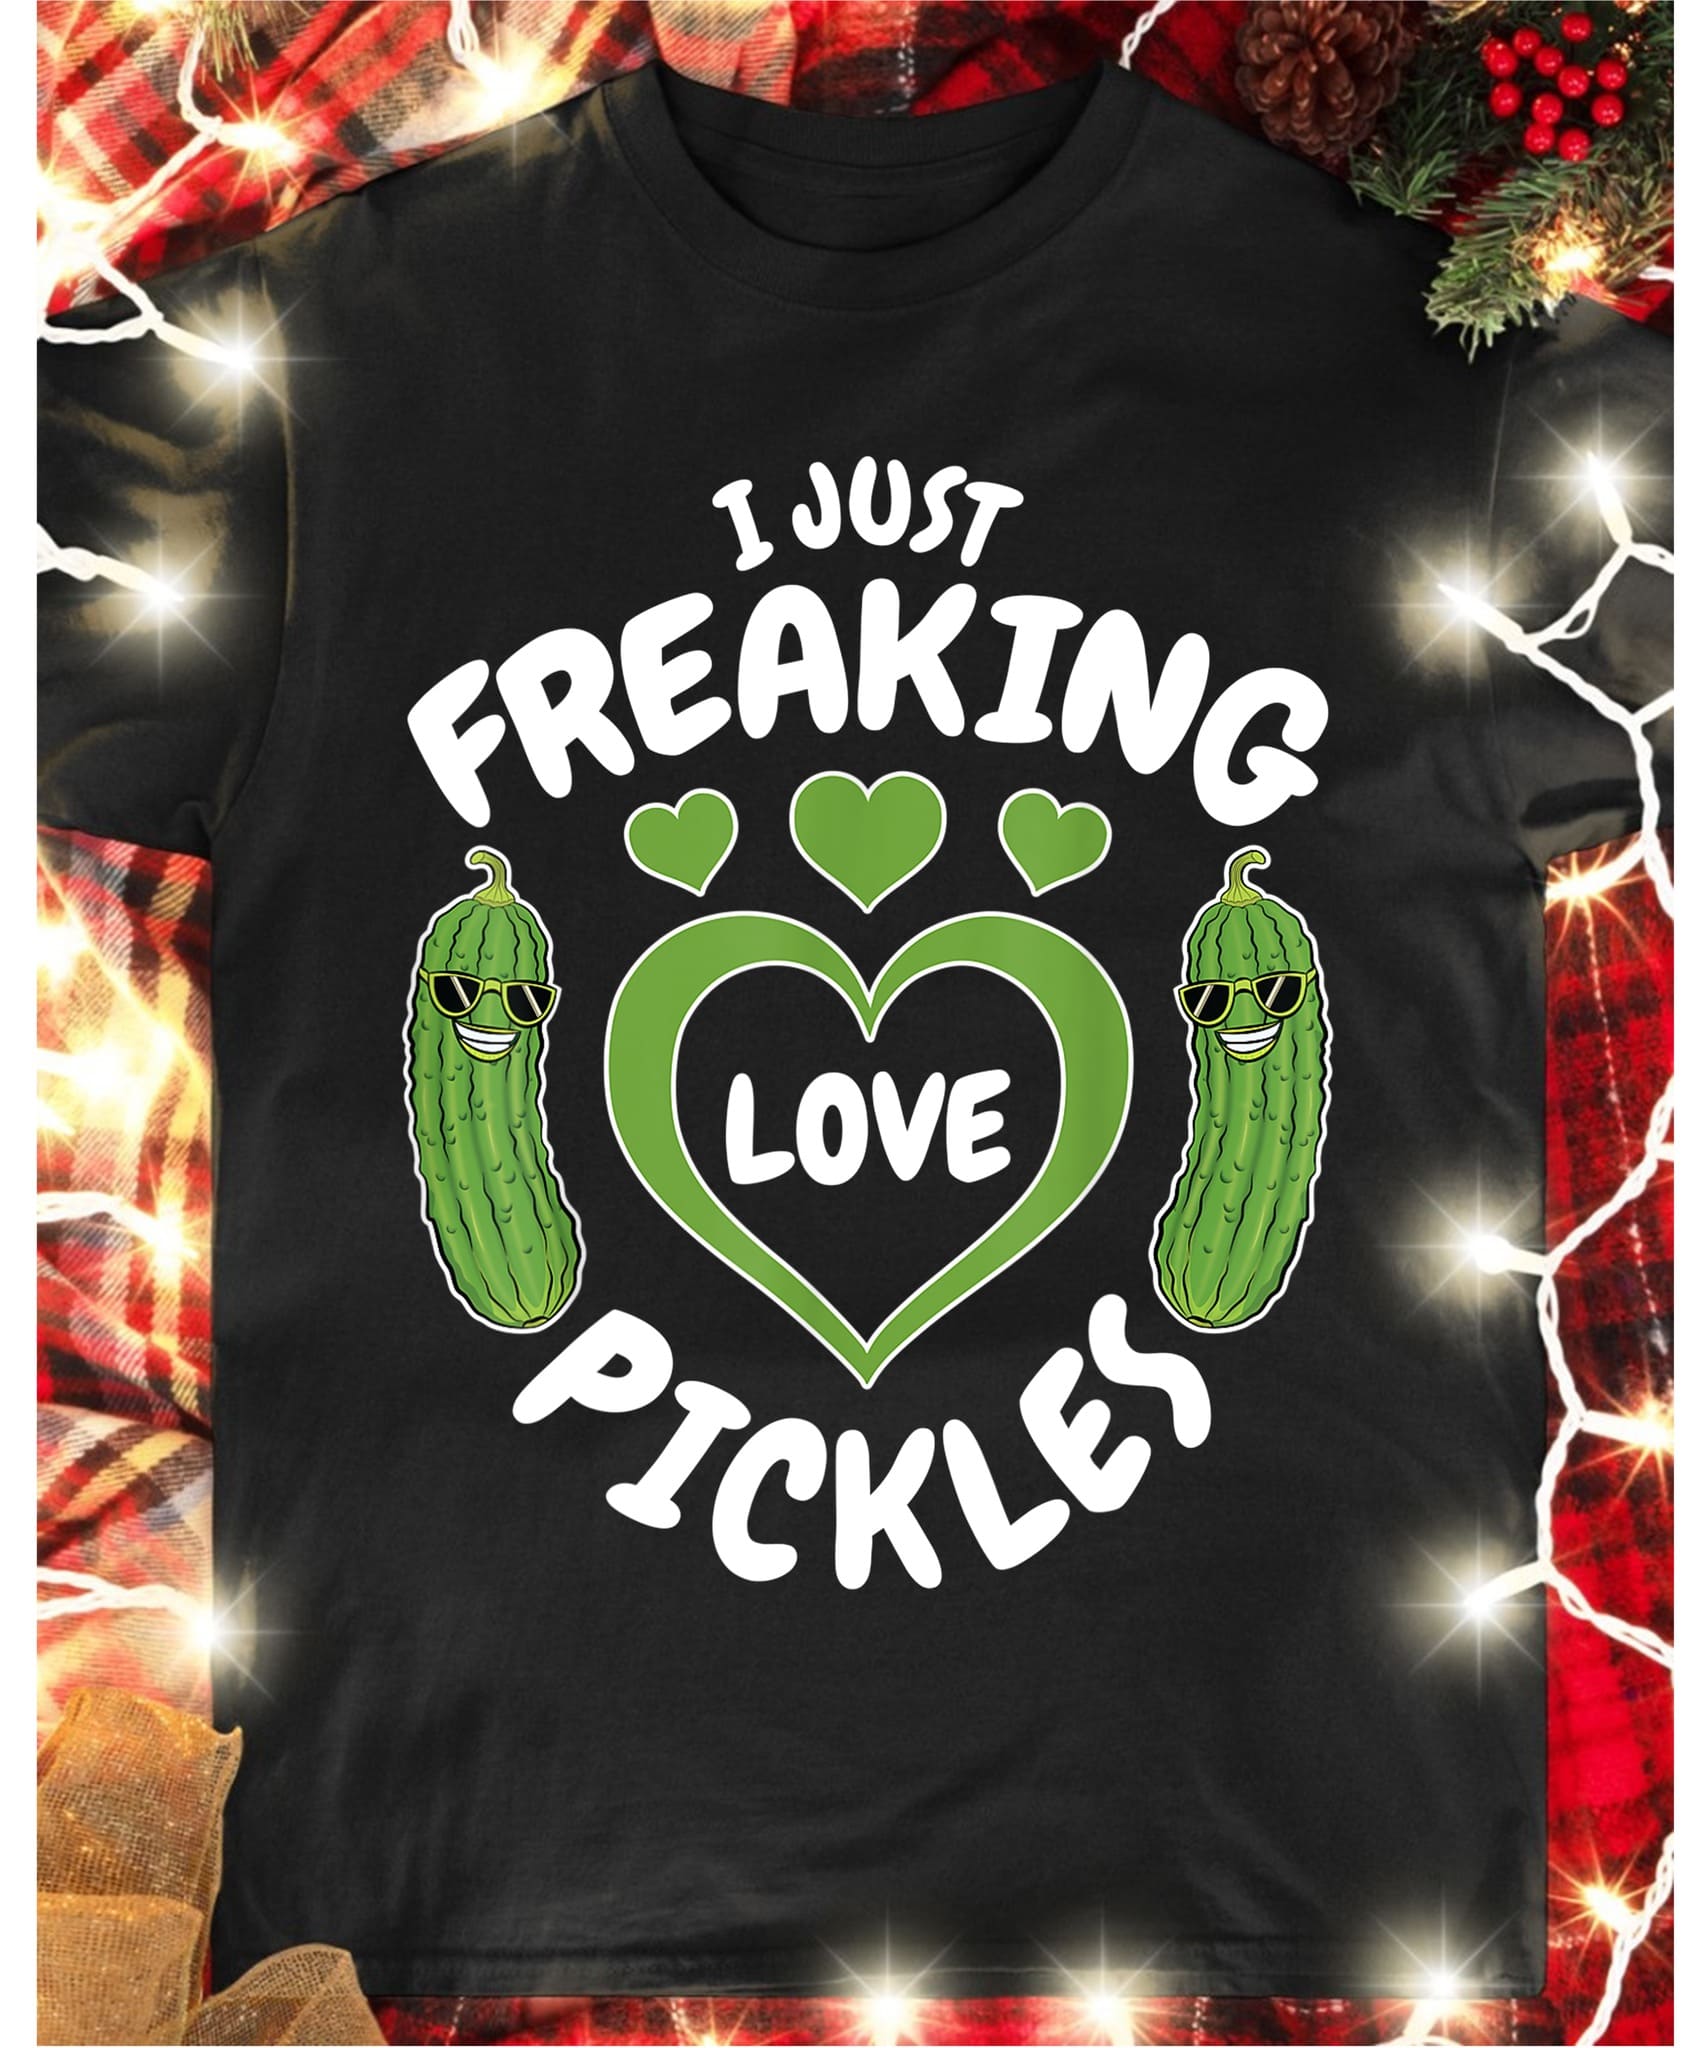 Funny Couple Pickle - I just freaking love pickles